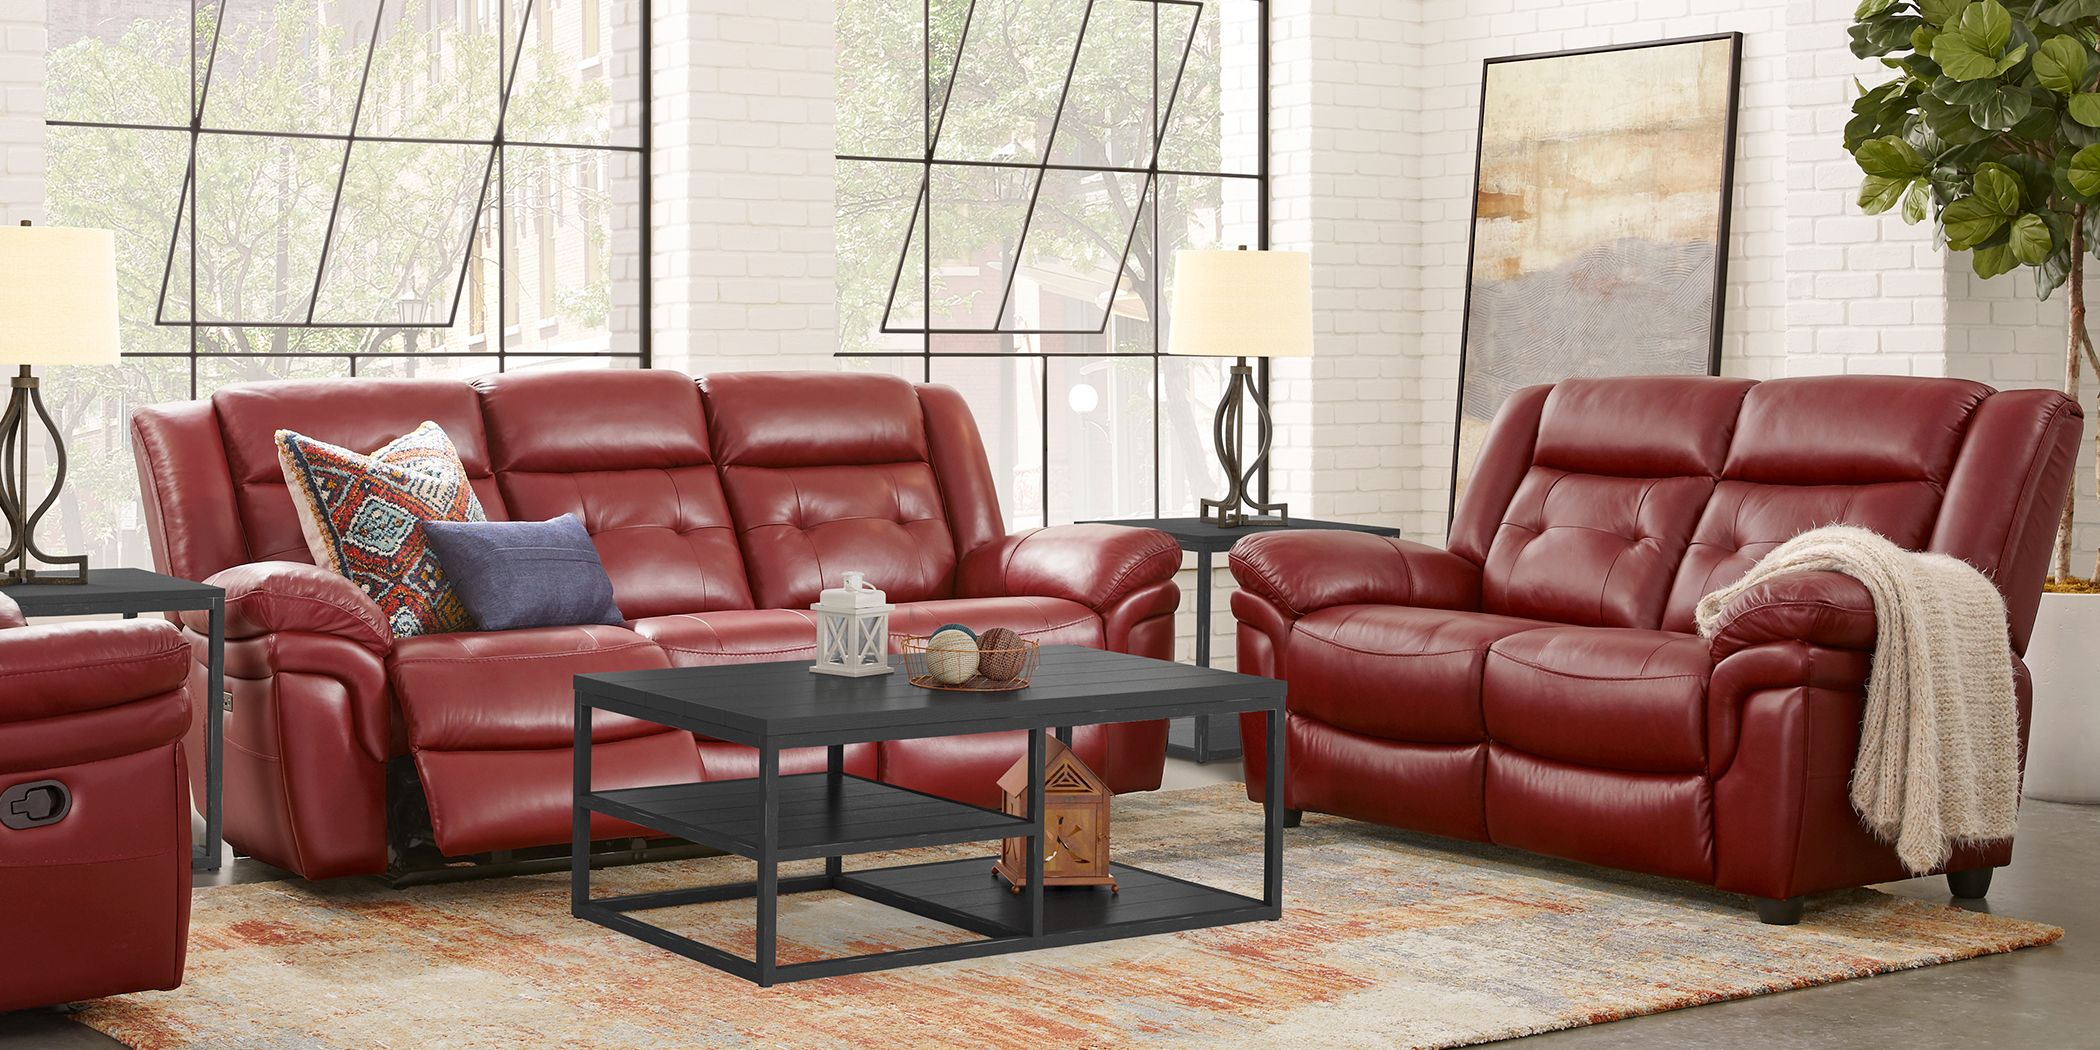 Ventoso Red Leather 3 Pc Living Room, Red Leather Couch Living Room